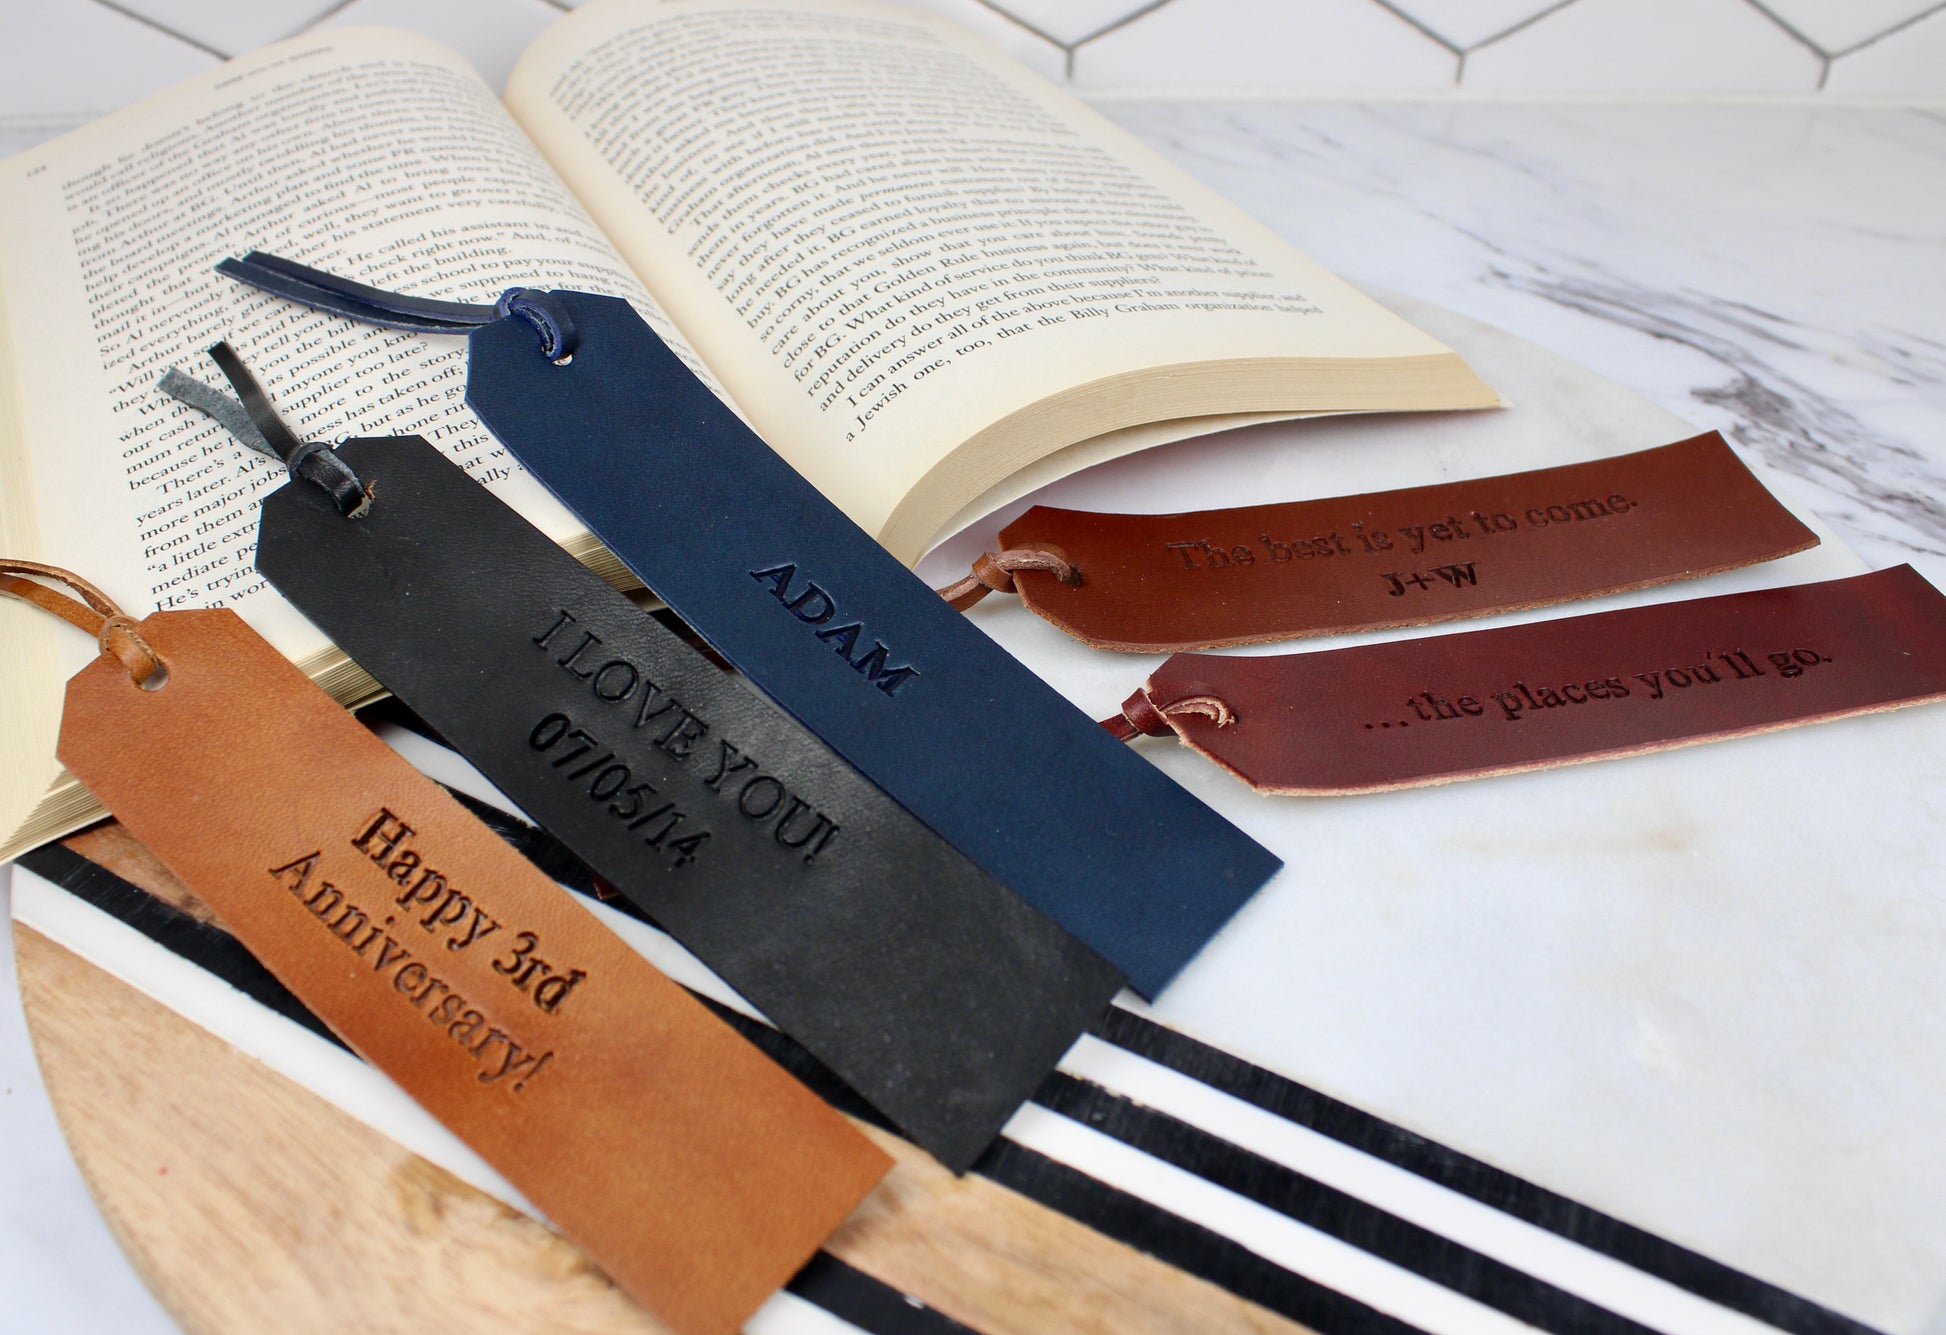 Personalized leather bookmark. Handmade leather bookmark. Custom made bookmark. leather gift for men. leather gift for women. book gift for men. booklover gift. graduation gift for men. gift for husband. leather accessory. 3rd anniversary leather gift.